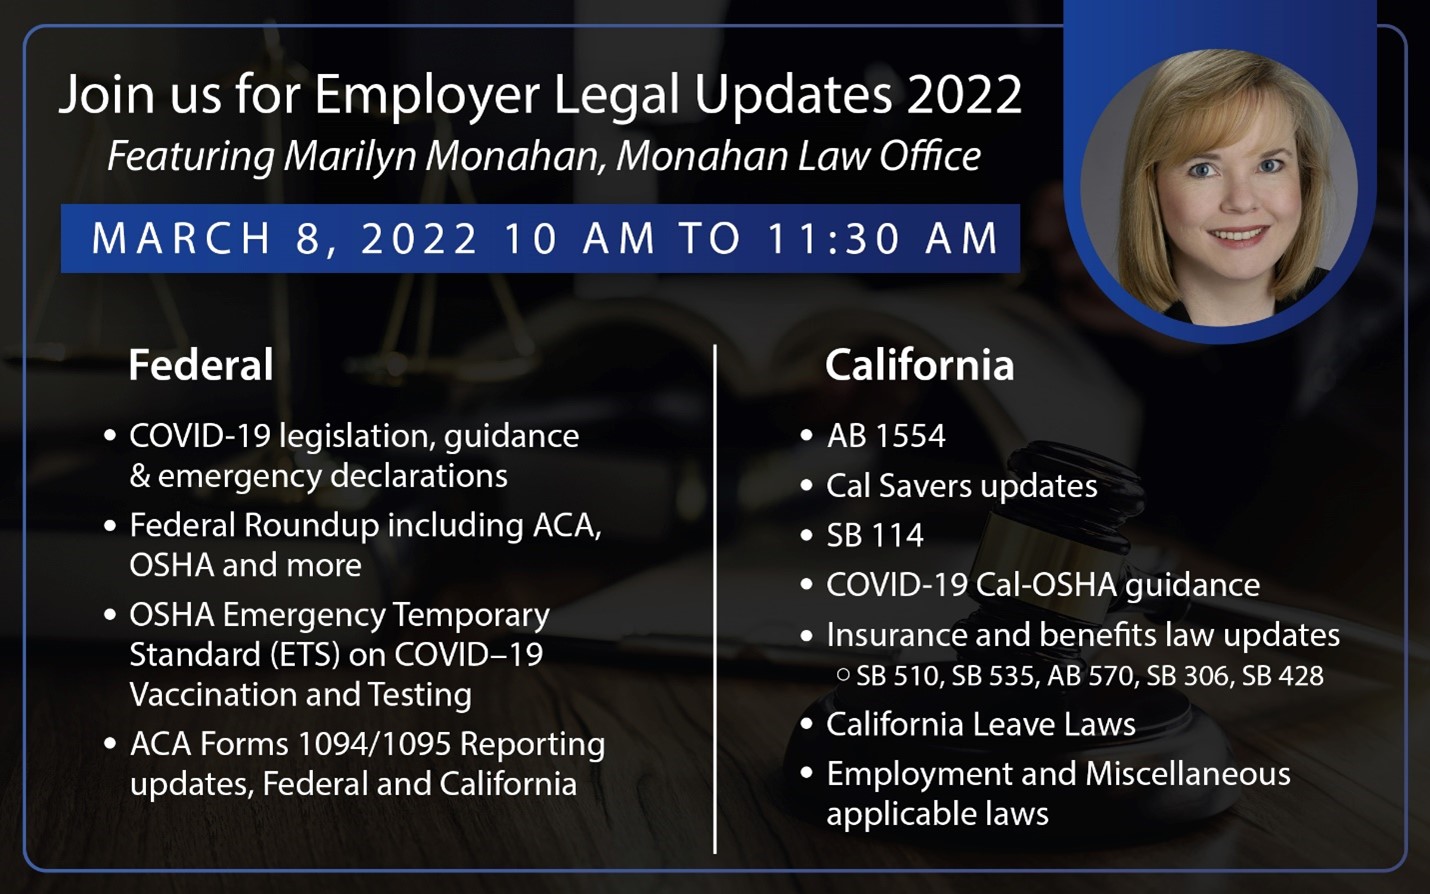 March 8, 2022 legal updates